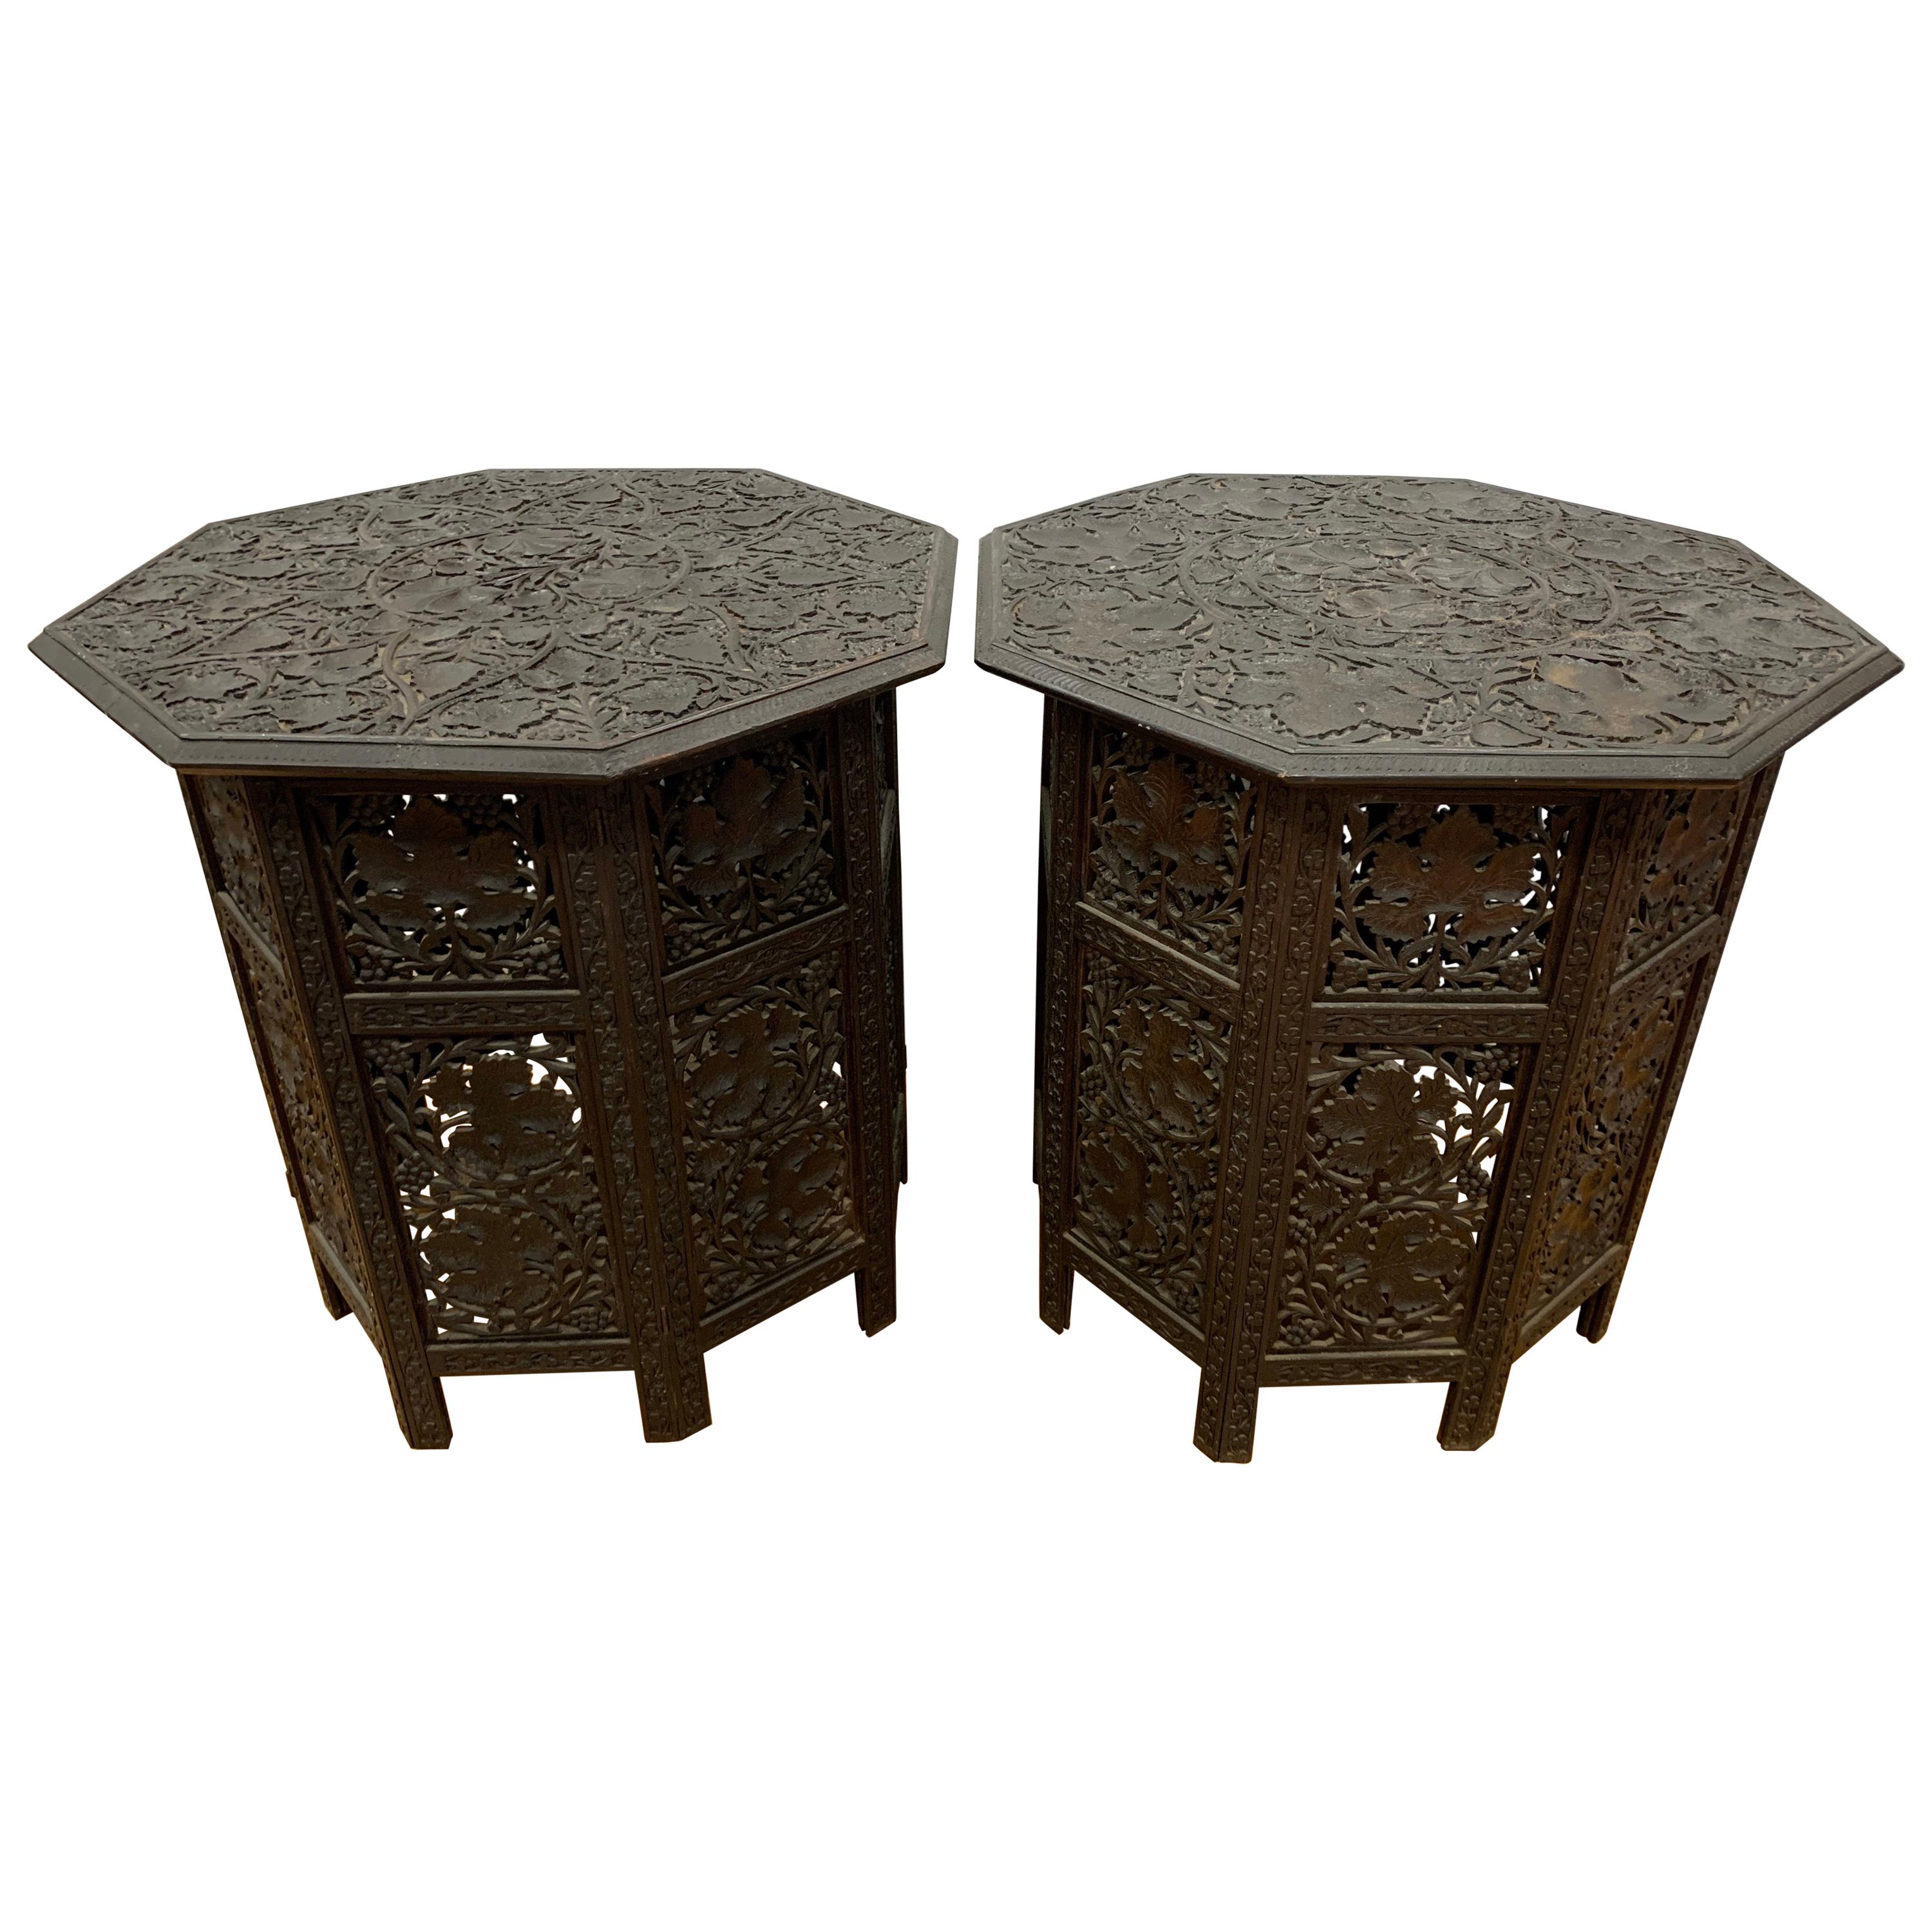 Pair of Carved Anglo Indian Octagonal Folding Tables